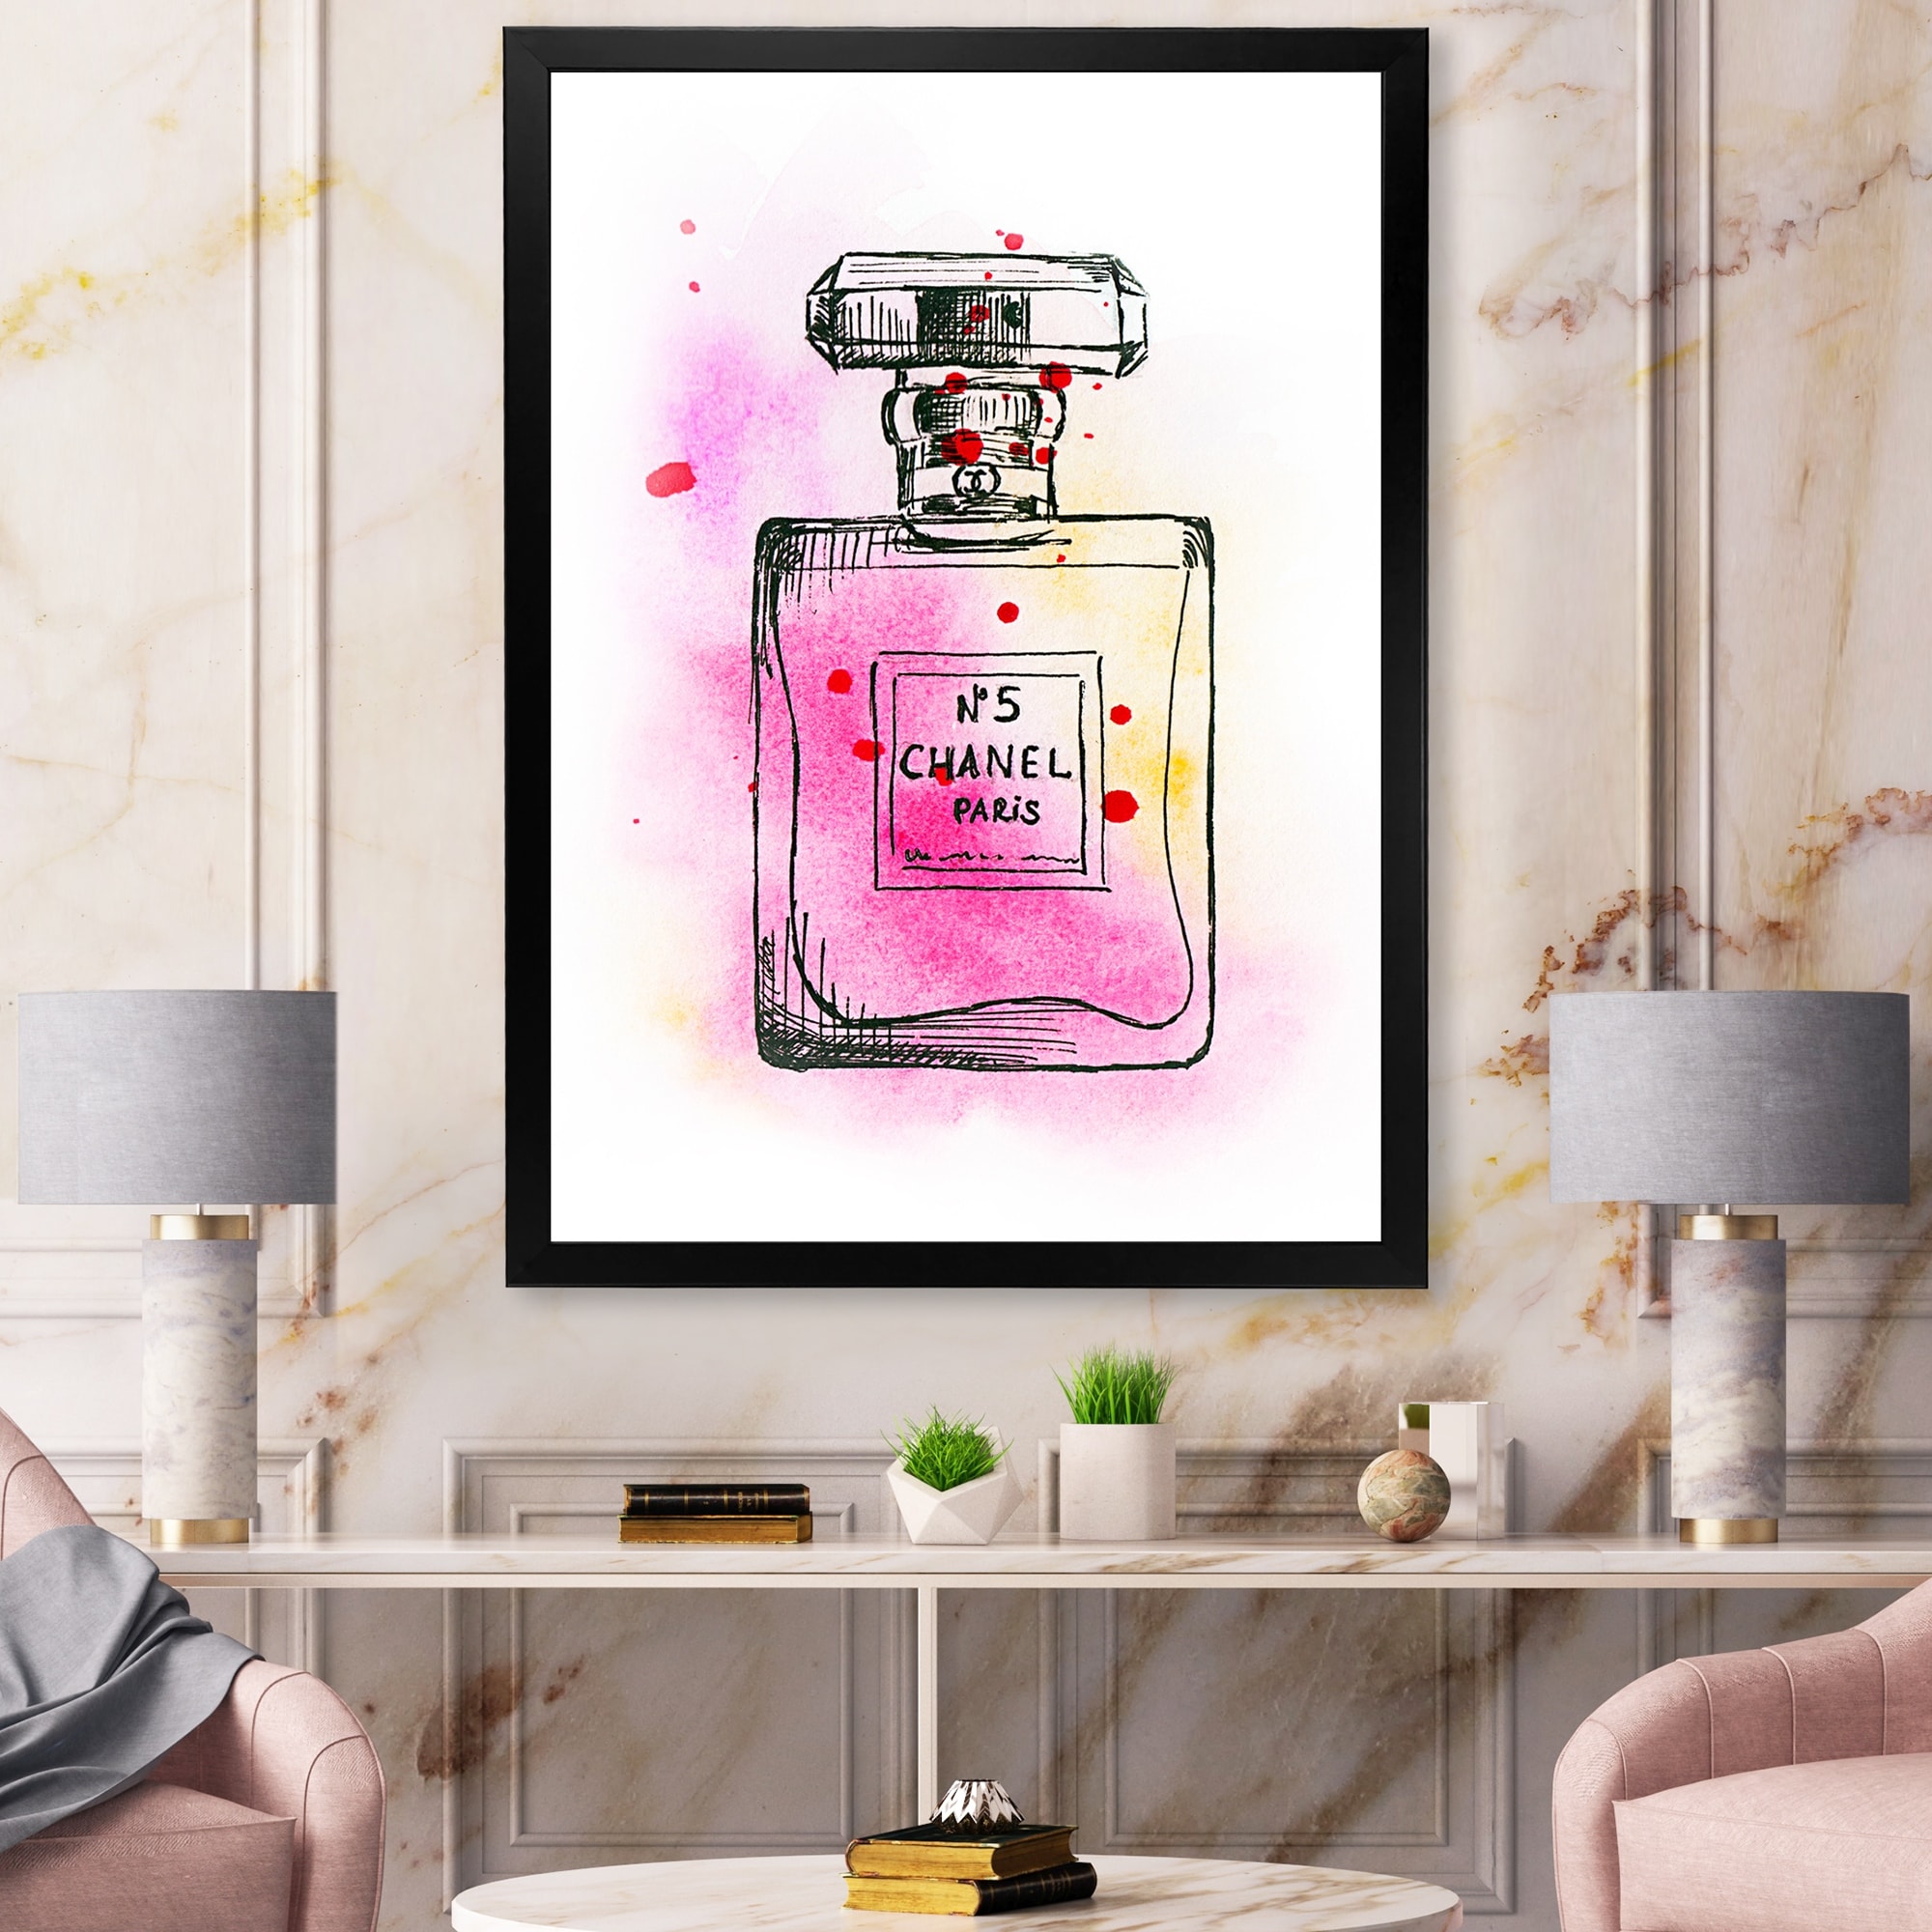 Designart Perfume Chanel Five IV French Country Framed Art Print